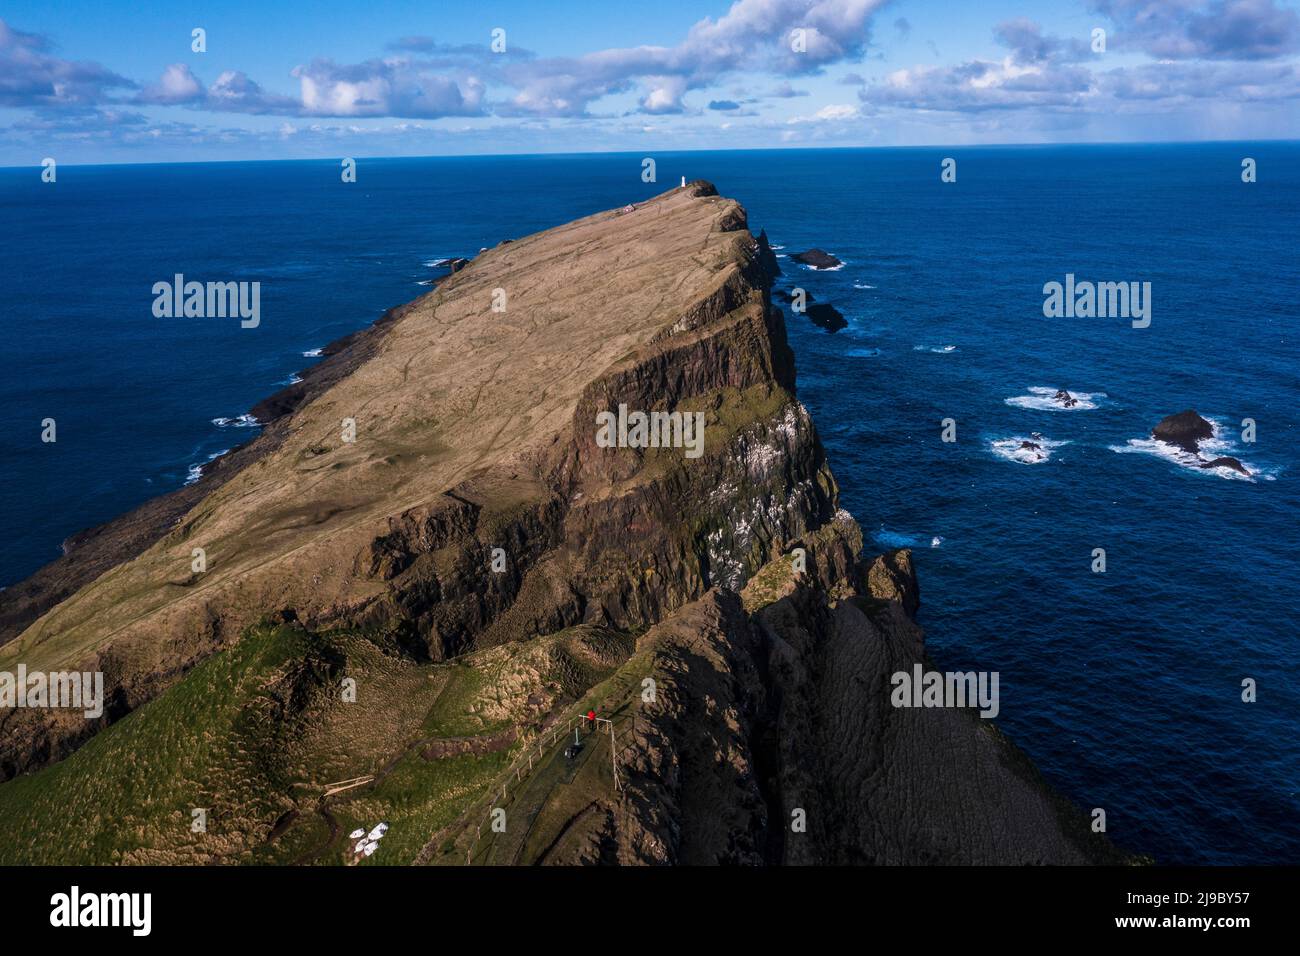 A hilly outcrop on the Faroe Islands. Stock Photo